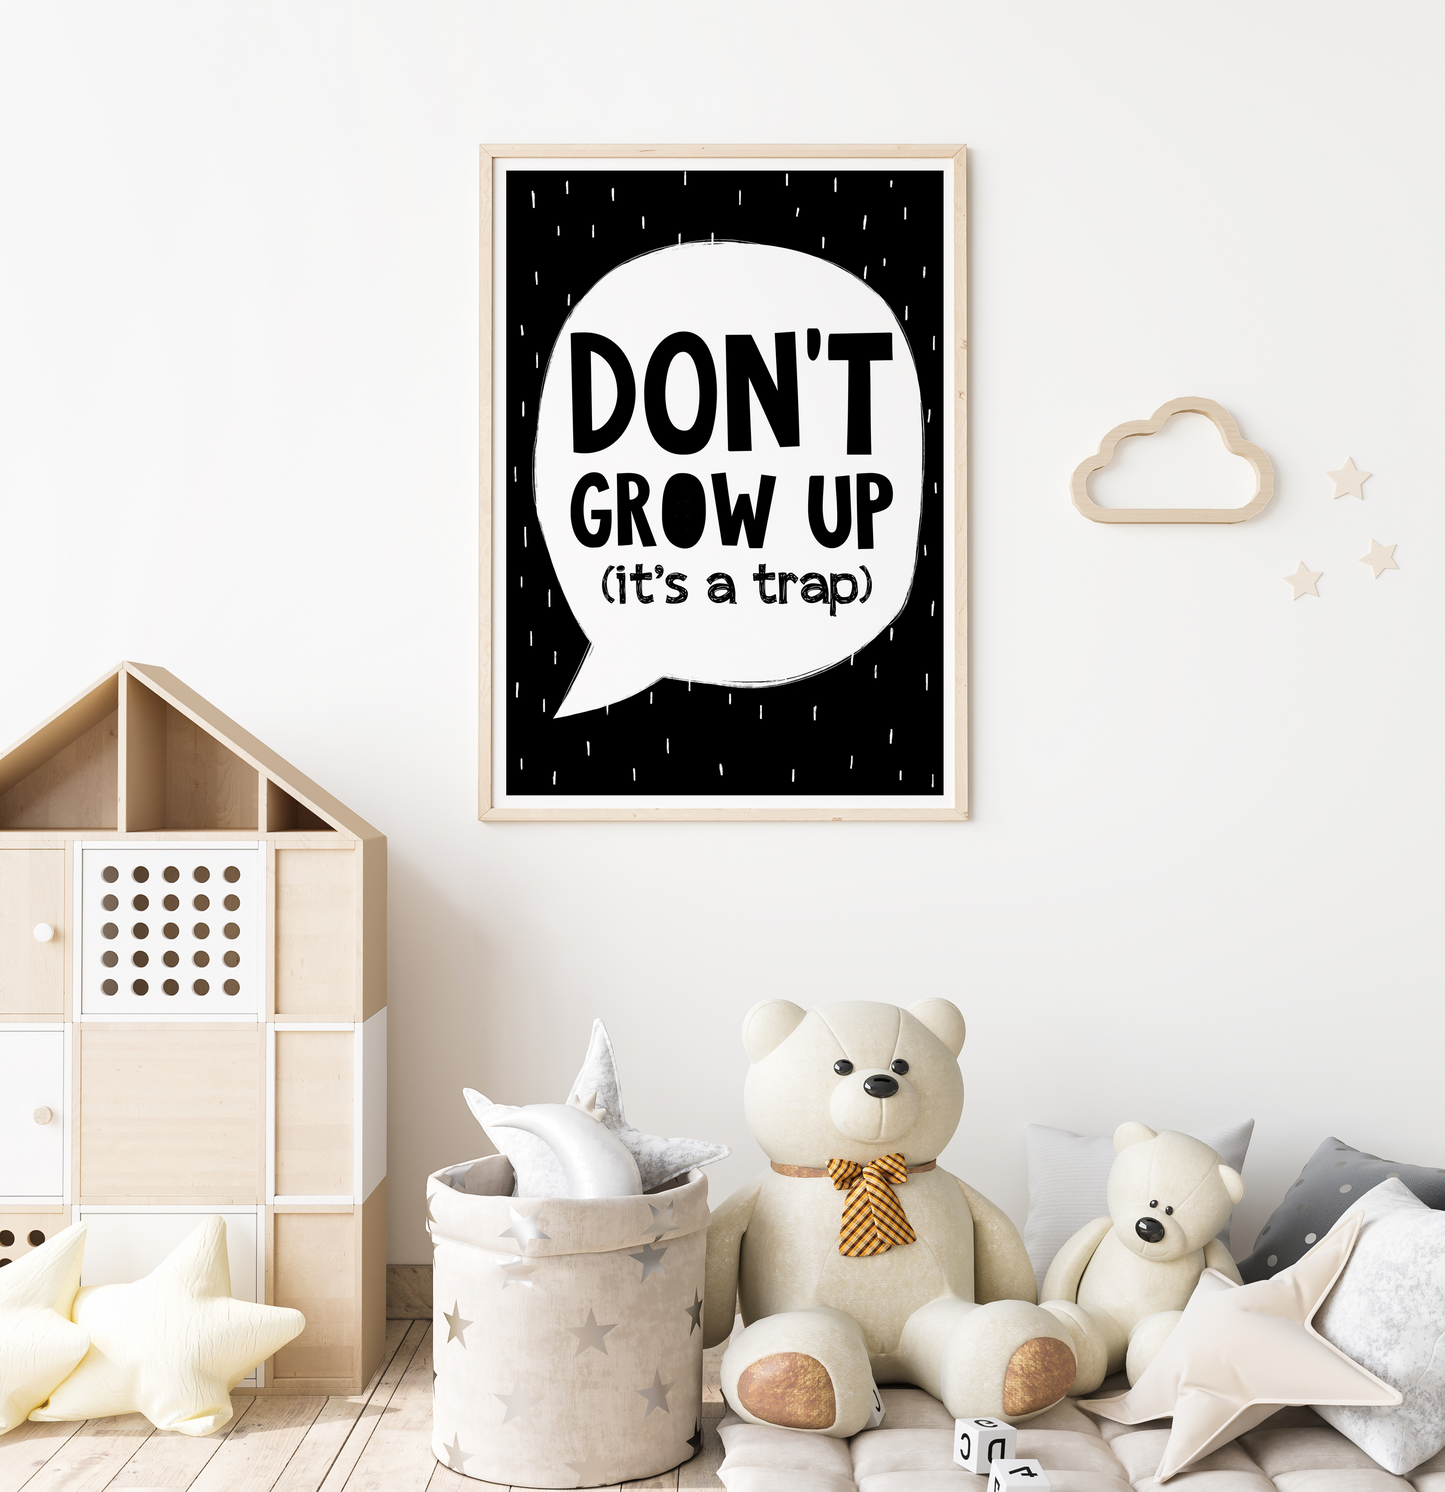 Dont grow up (it's a trap) quote print